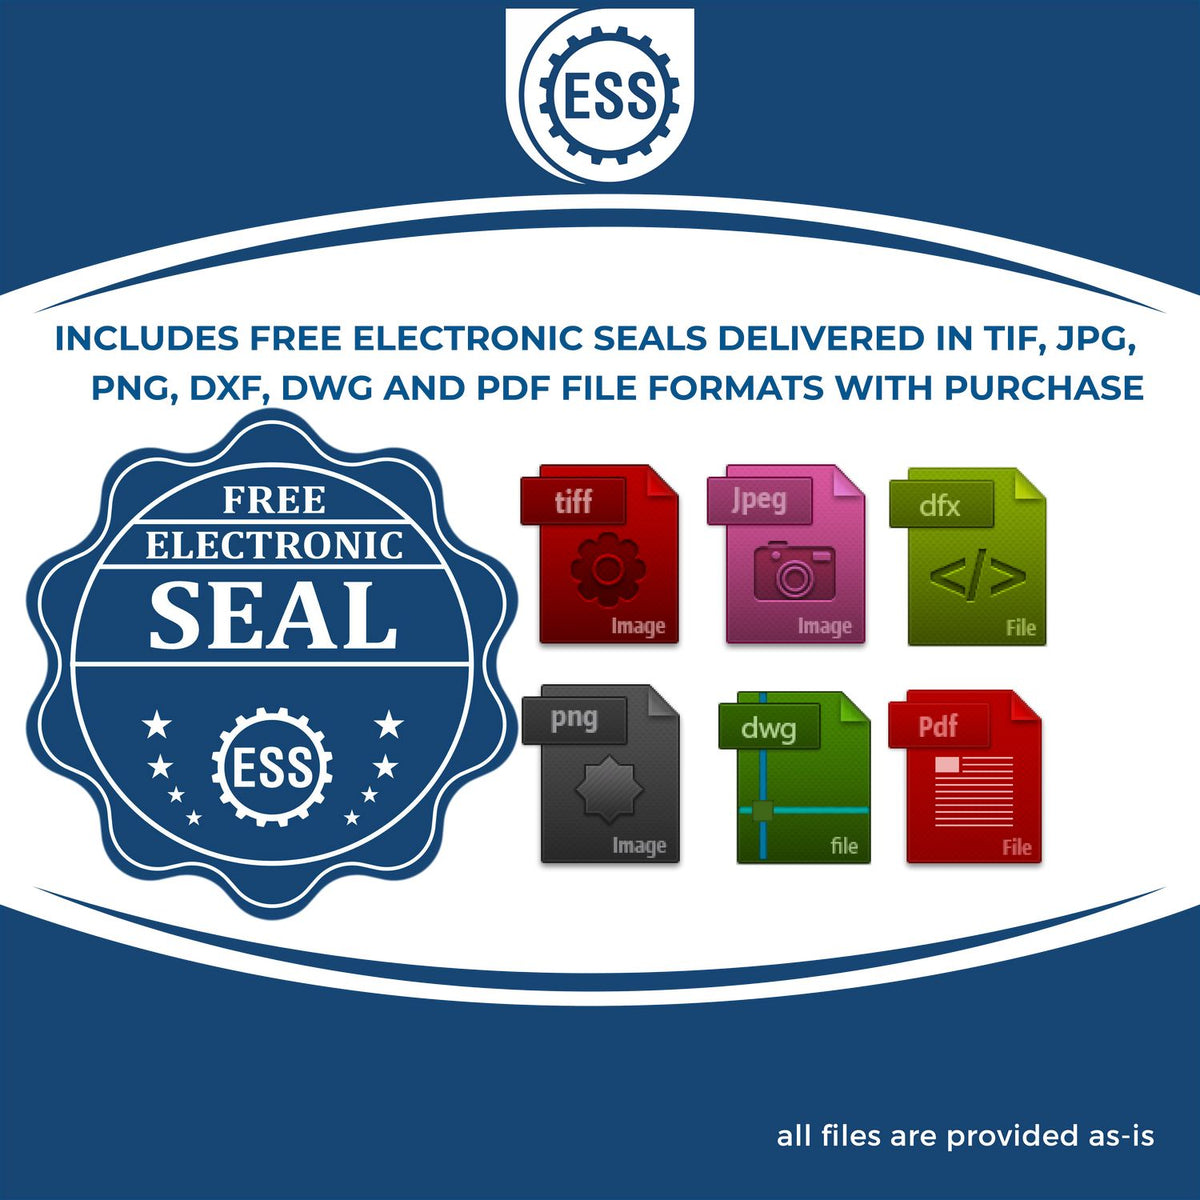 An infographic for the free electronic seal for the Slim Pre-Inked Pennsylvania Architect Seal Stamp illustrating the different file type icons such as DXF, DWG, TIF, JPG and PNG.